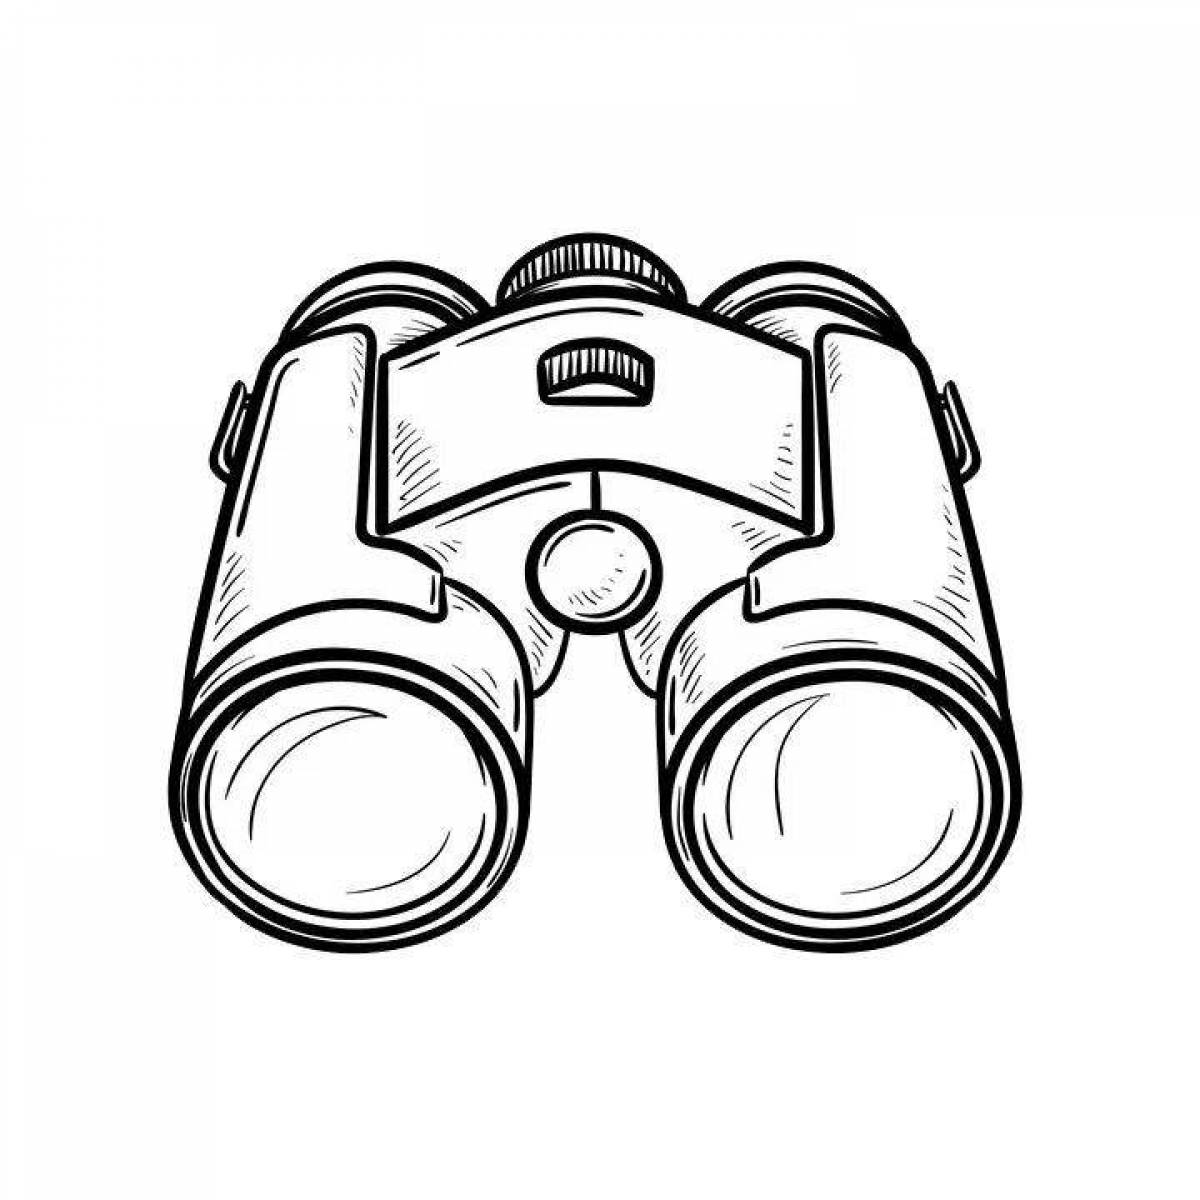 Colourful binoculars coloring page